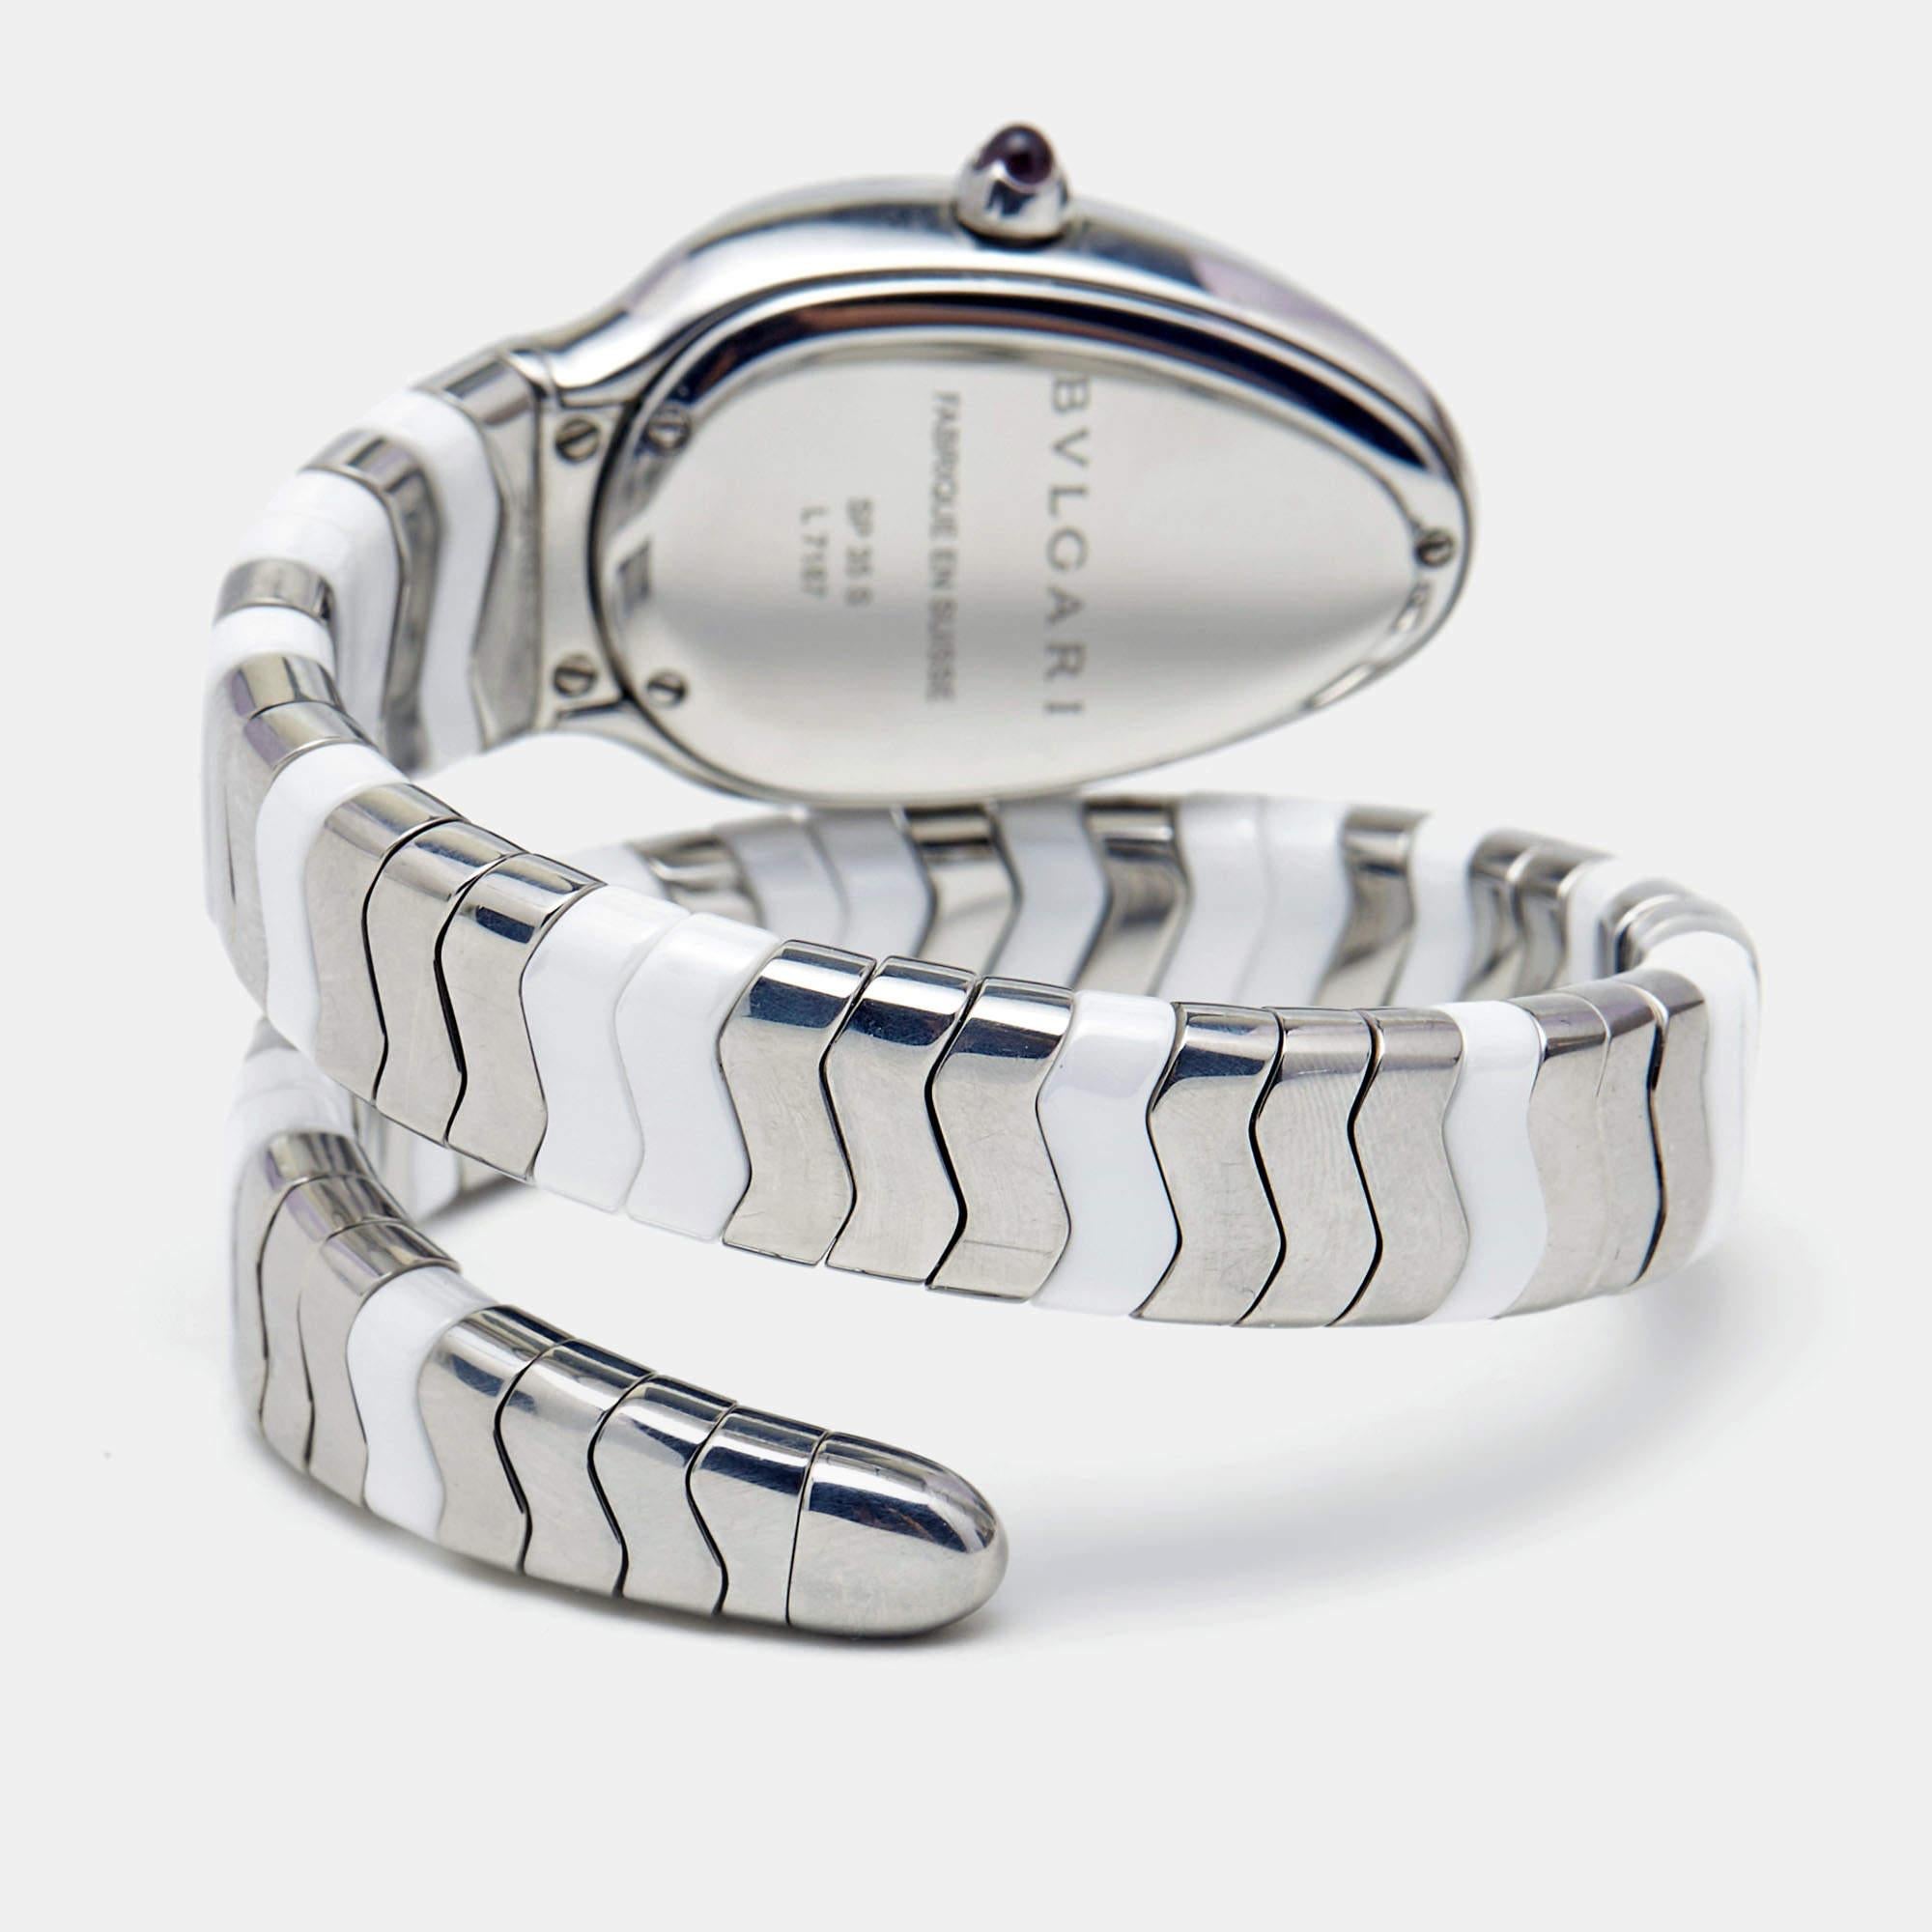 If you're looking for a stylish and unique watch, then opt for this artistic Bvlgari Serpenti Spiga wristwatch. Designed to represent the fluid shape of the serpent, this piece features a white dial with steel hands & markers inside the stainless